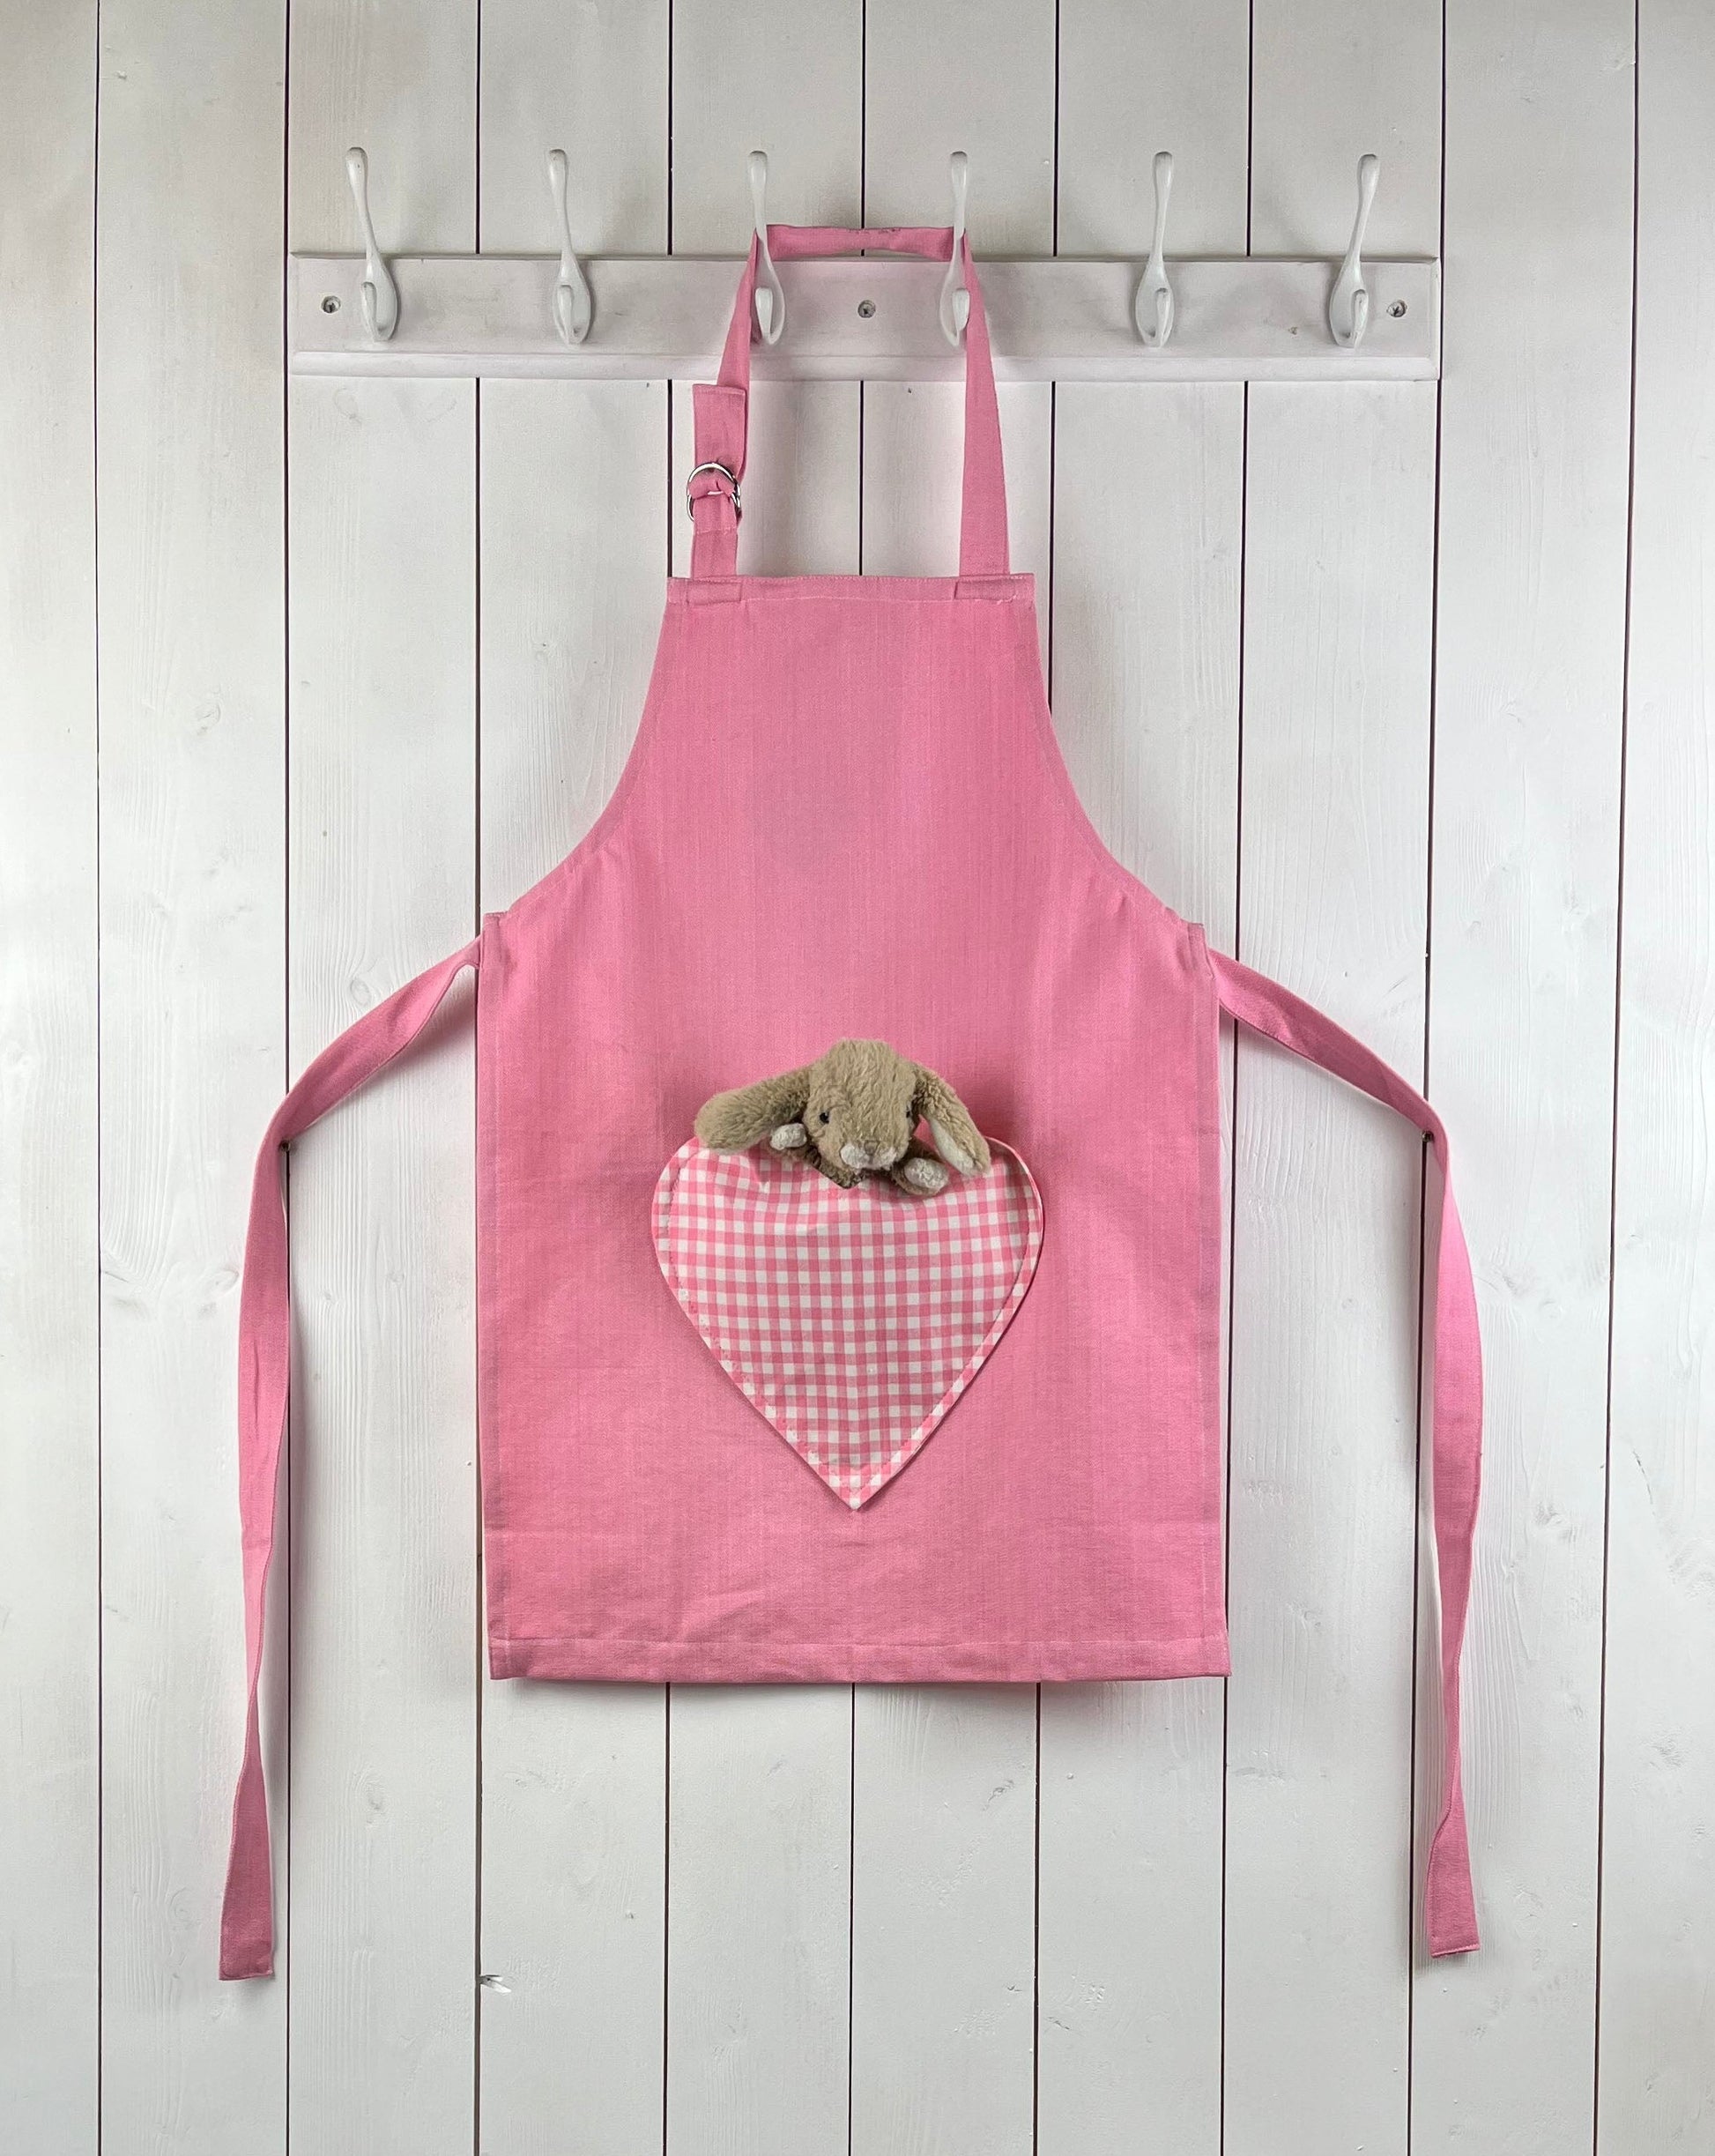 Pink child apron with gingham heart shaped pocket. From Sterck & Co. Rabbit not included.